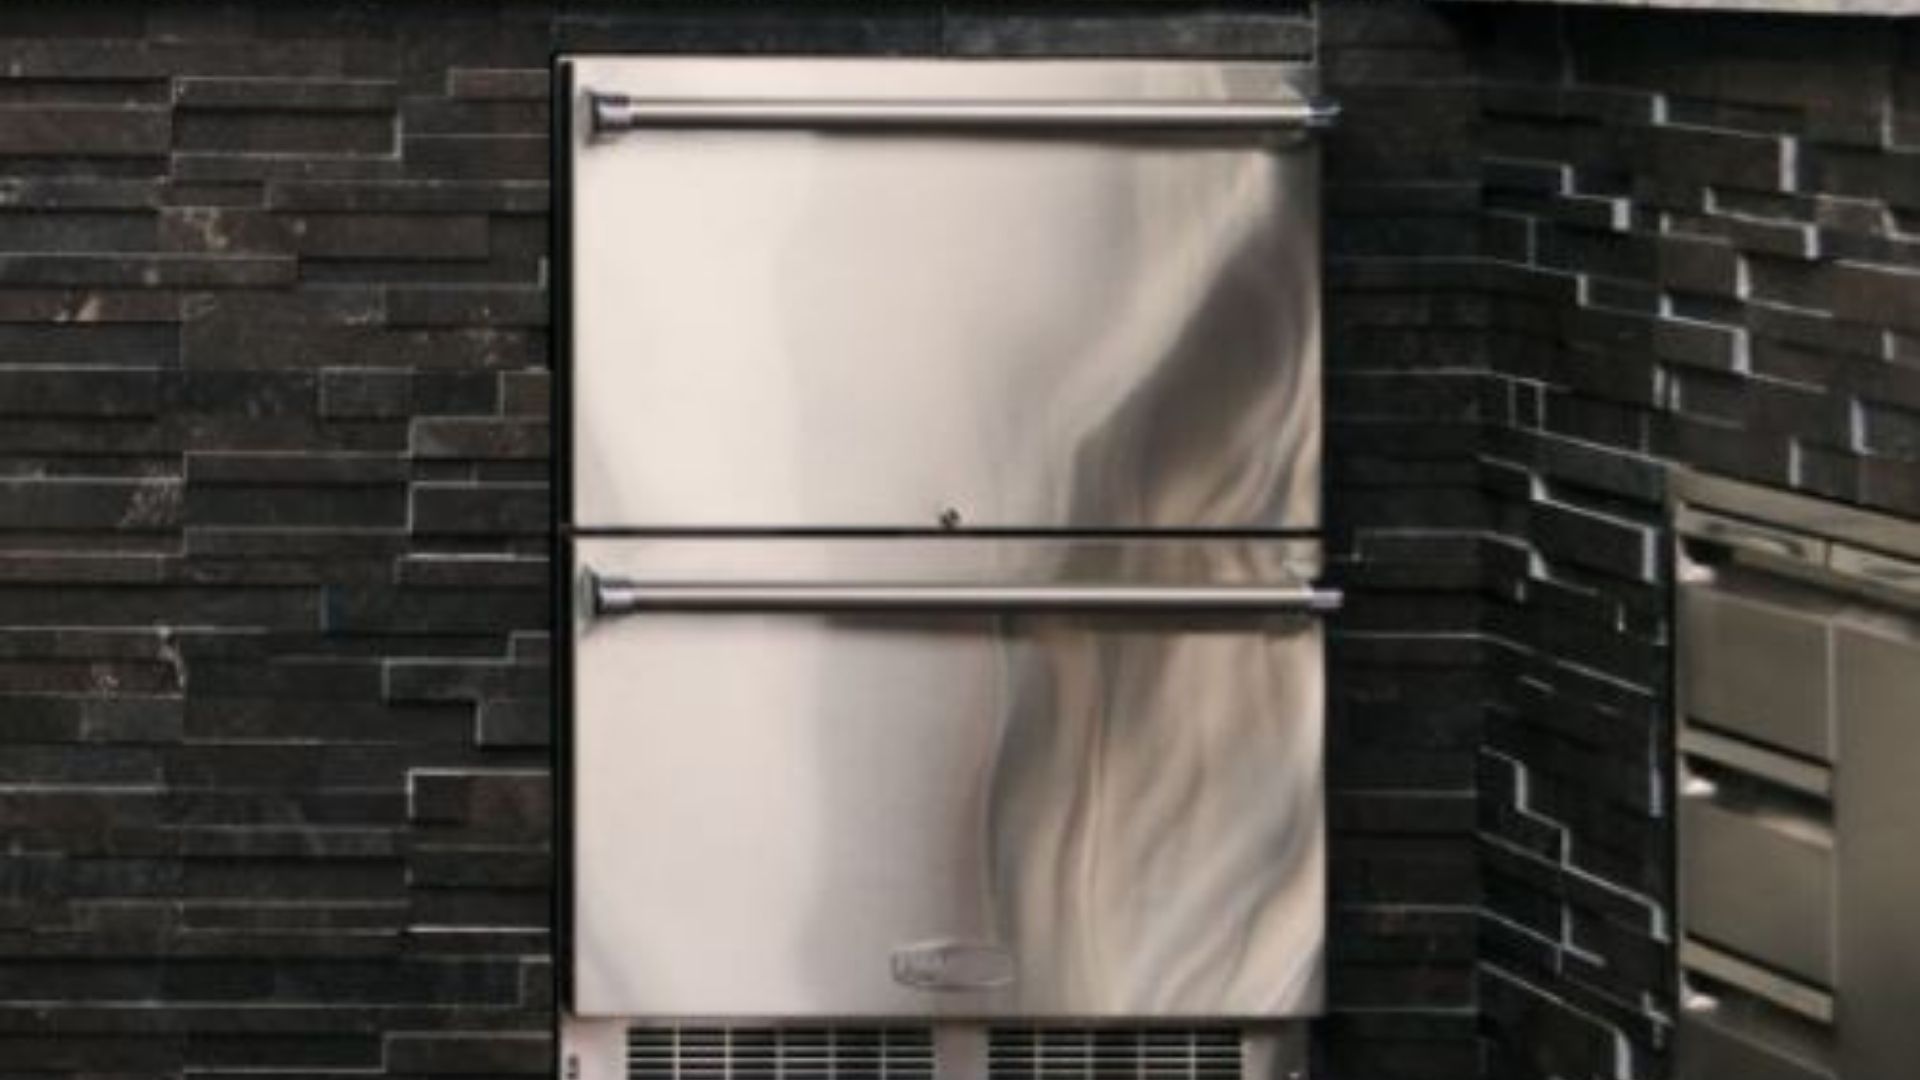 What You Should Know About How to Protect an Outdoor Refrigerator